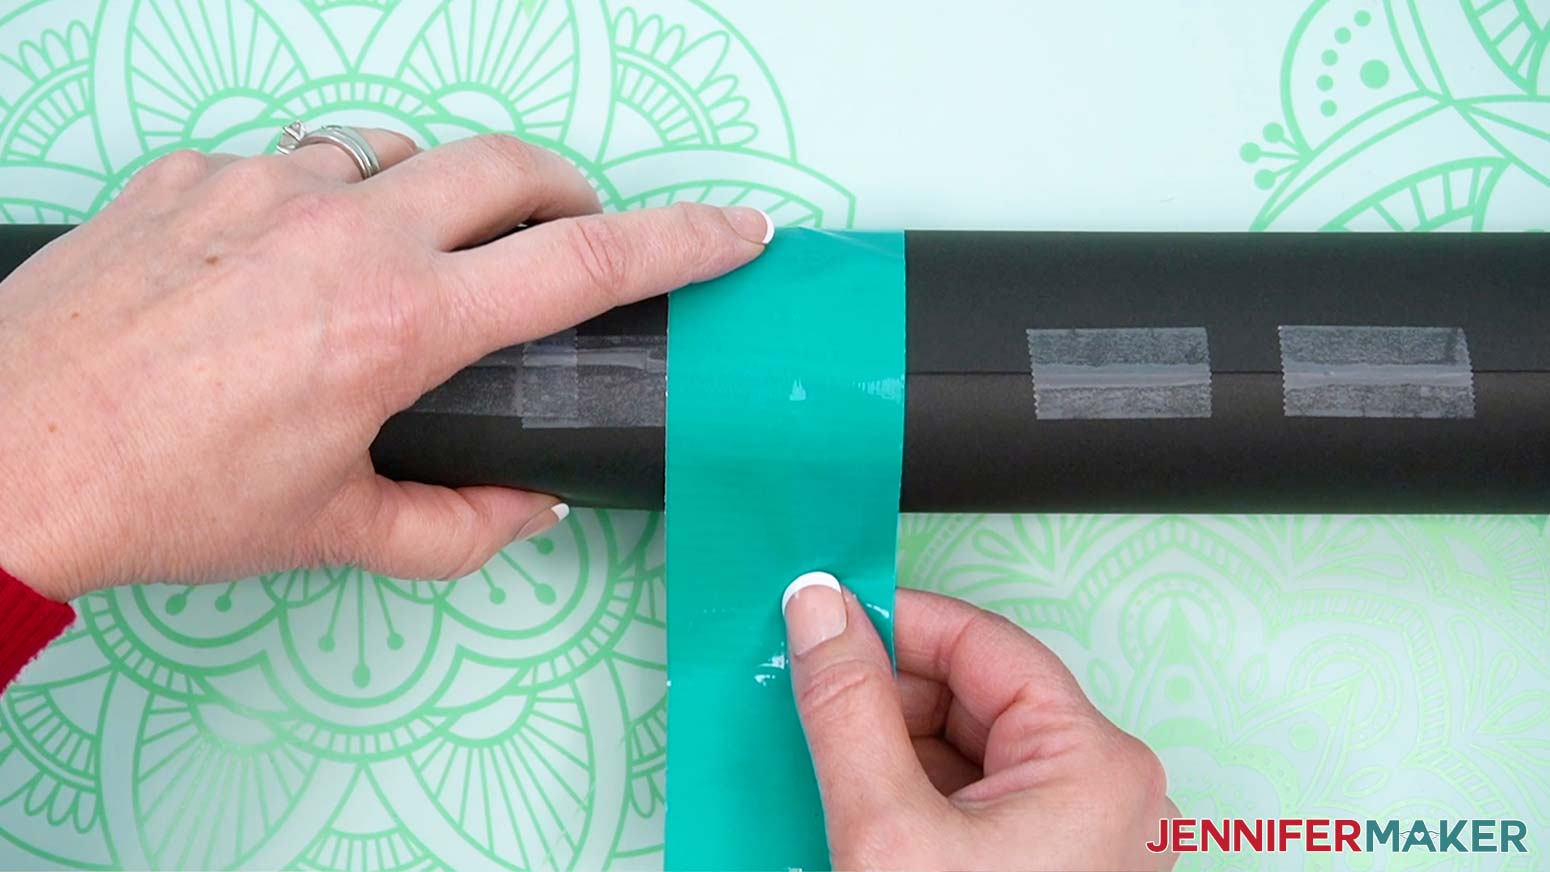 Apply duct tape around the seams for solid assembly that blocks all light.